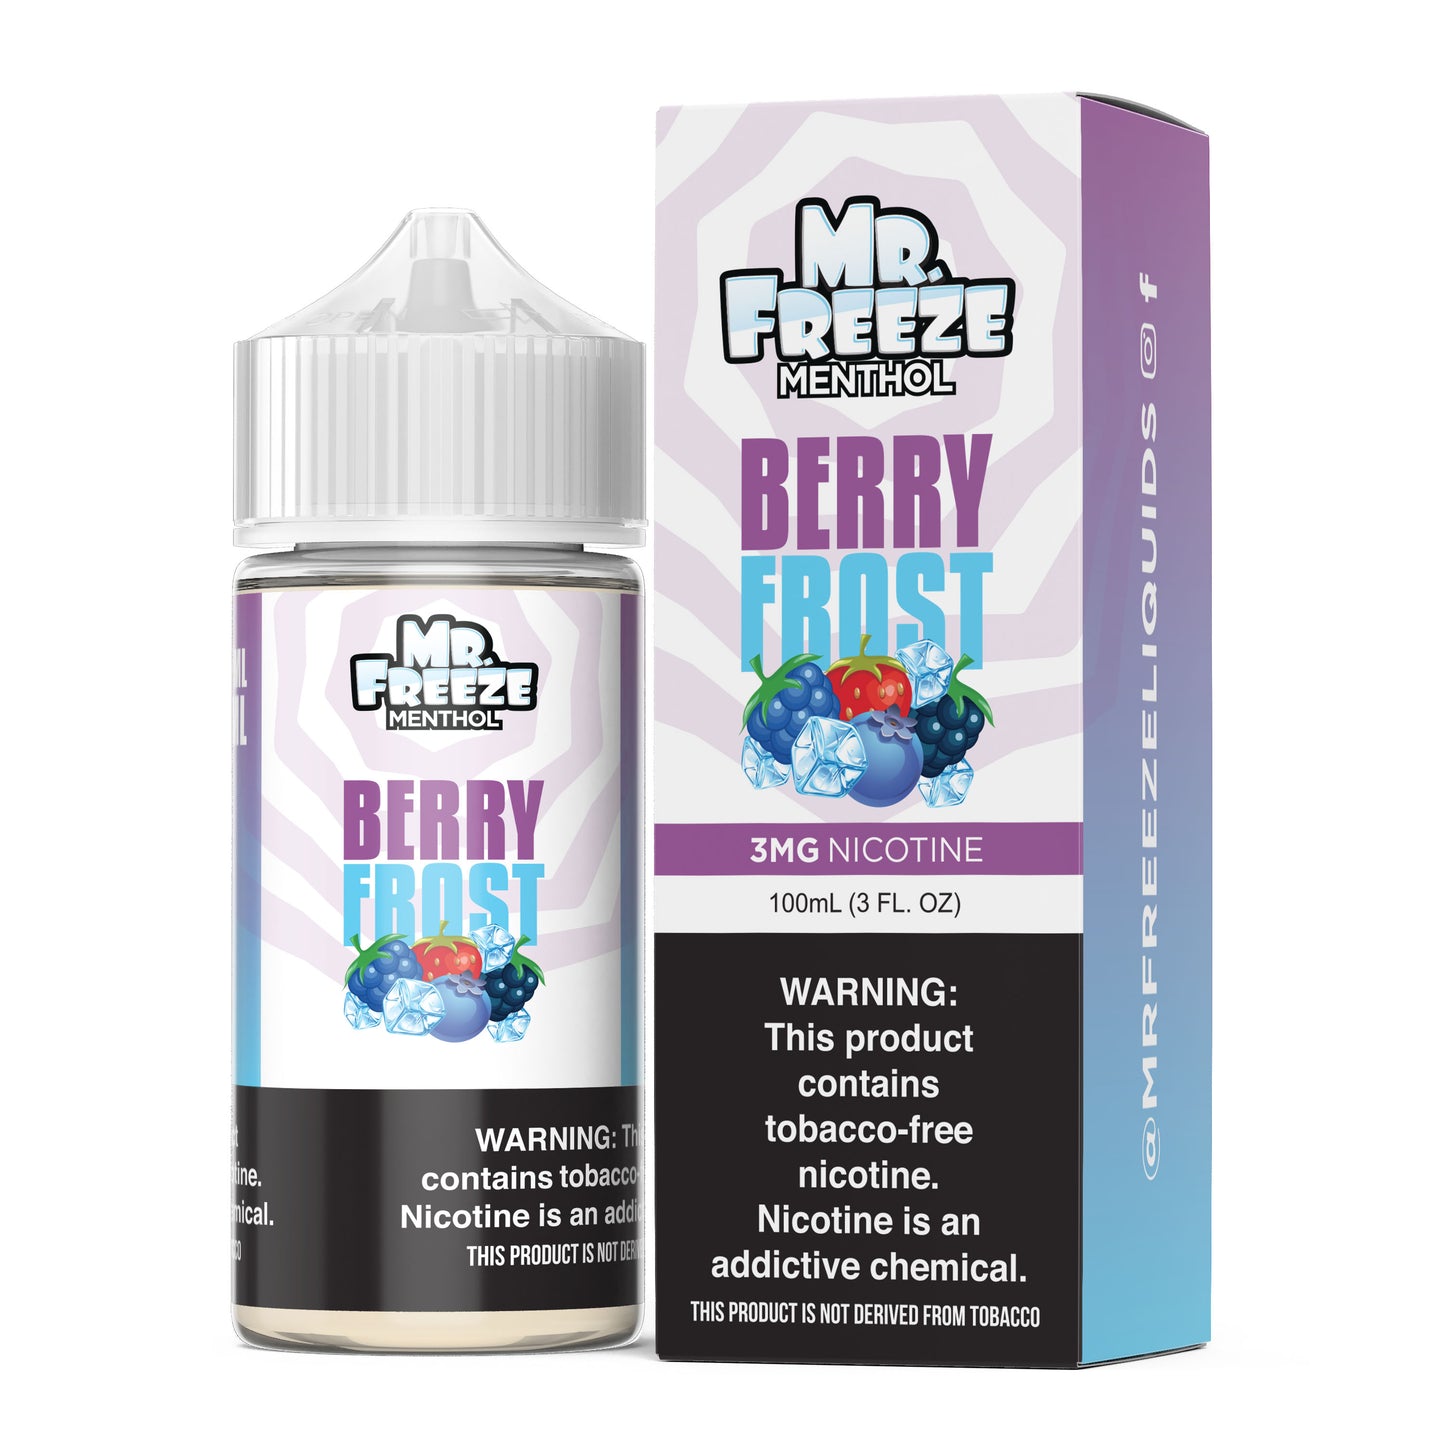 Berry Frost by Mr. Freeze Tobacco-Free Nicotine Series 100mL with Packaging